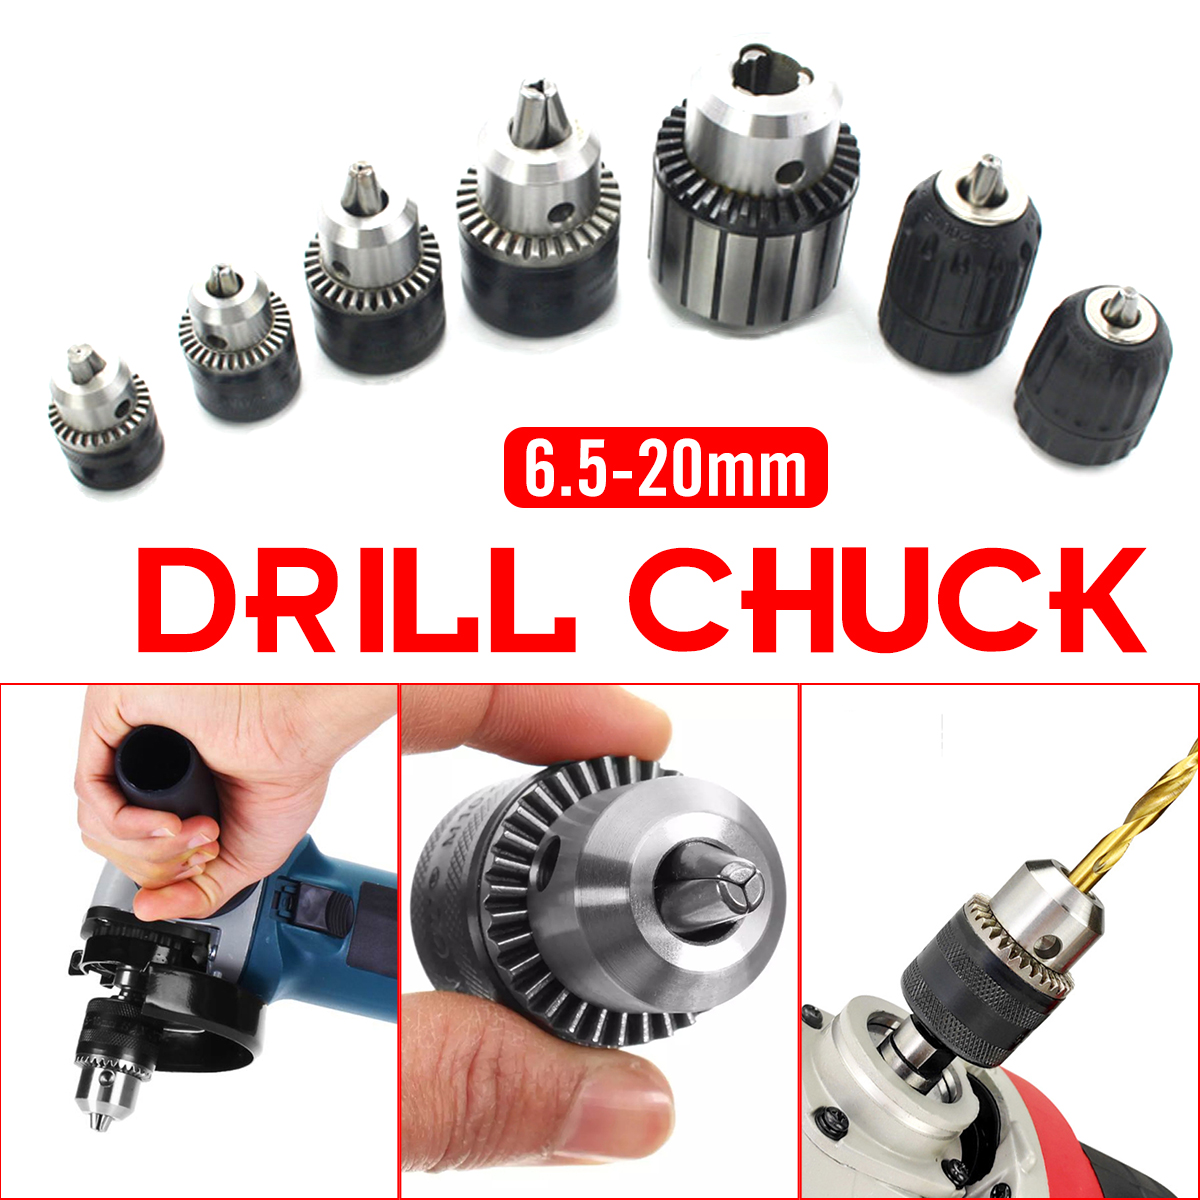 Drill Chuck Keyless Design 2-13mm HSS Angle Grinder Converter 1/2IN Electric 